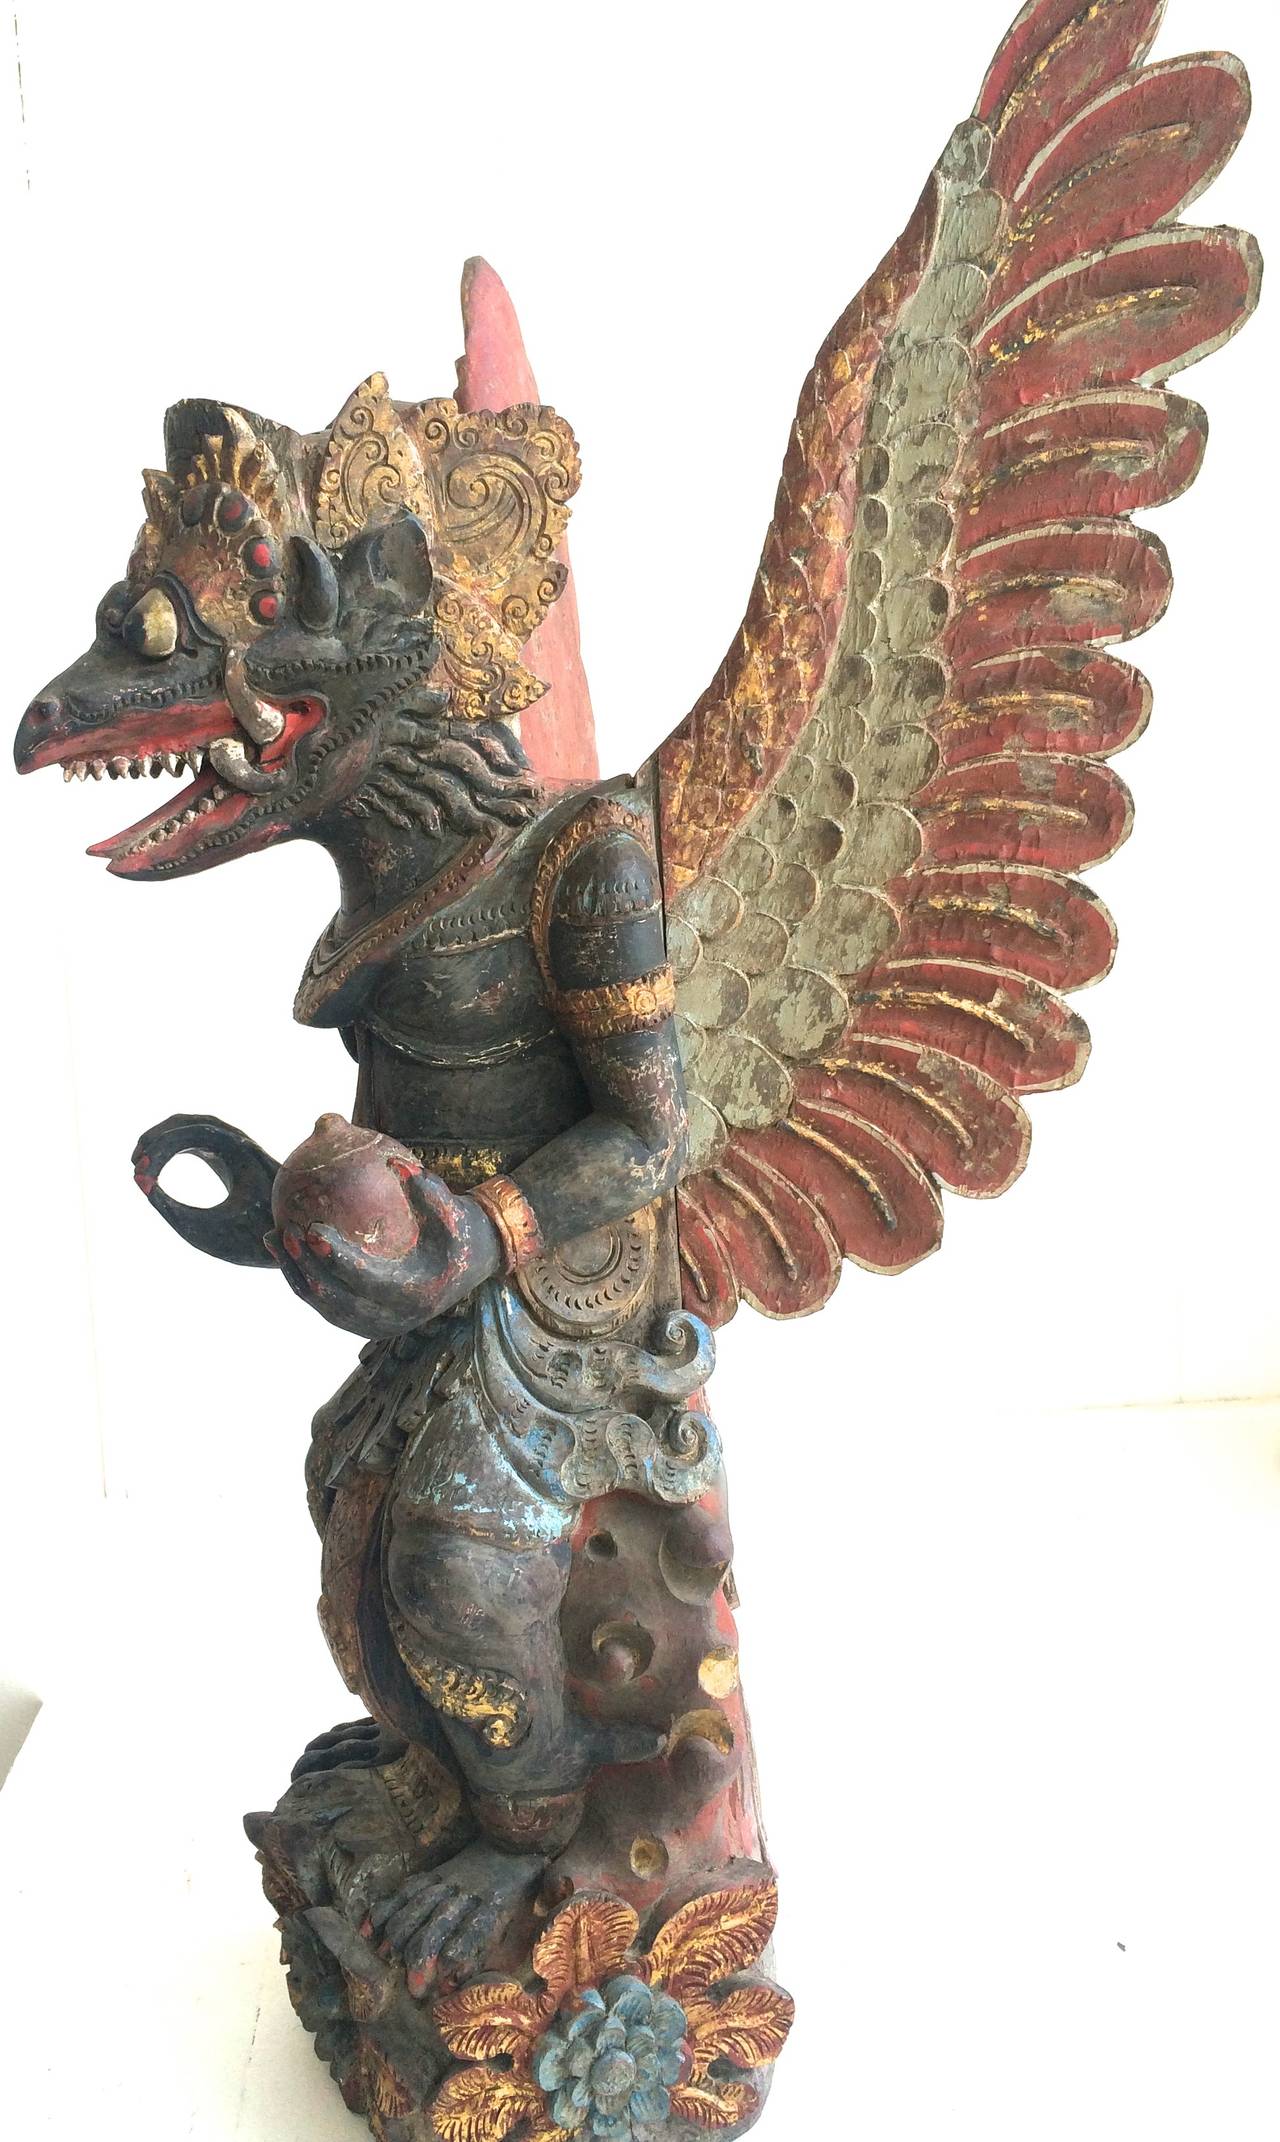 Fabulous and rare hand carved star wood sculpture.
The Garuda is a large bird-like creature, or humanoid bird that appears in both Hinduism and Buddhism. Garuda is the mount (vahana) of the Lord Vishnu.
Original Balinese Garuda temple figure 19th